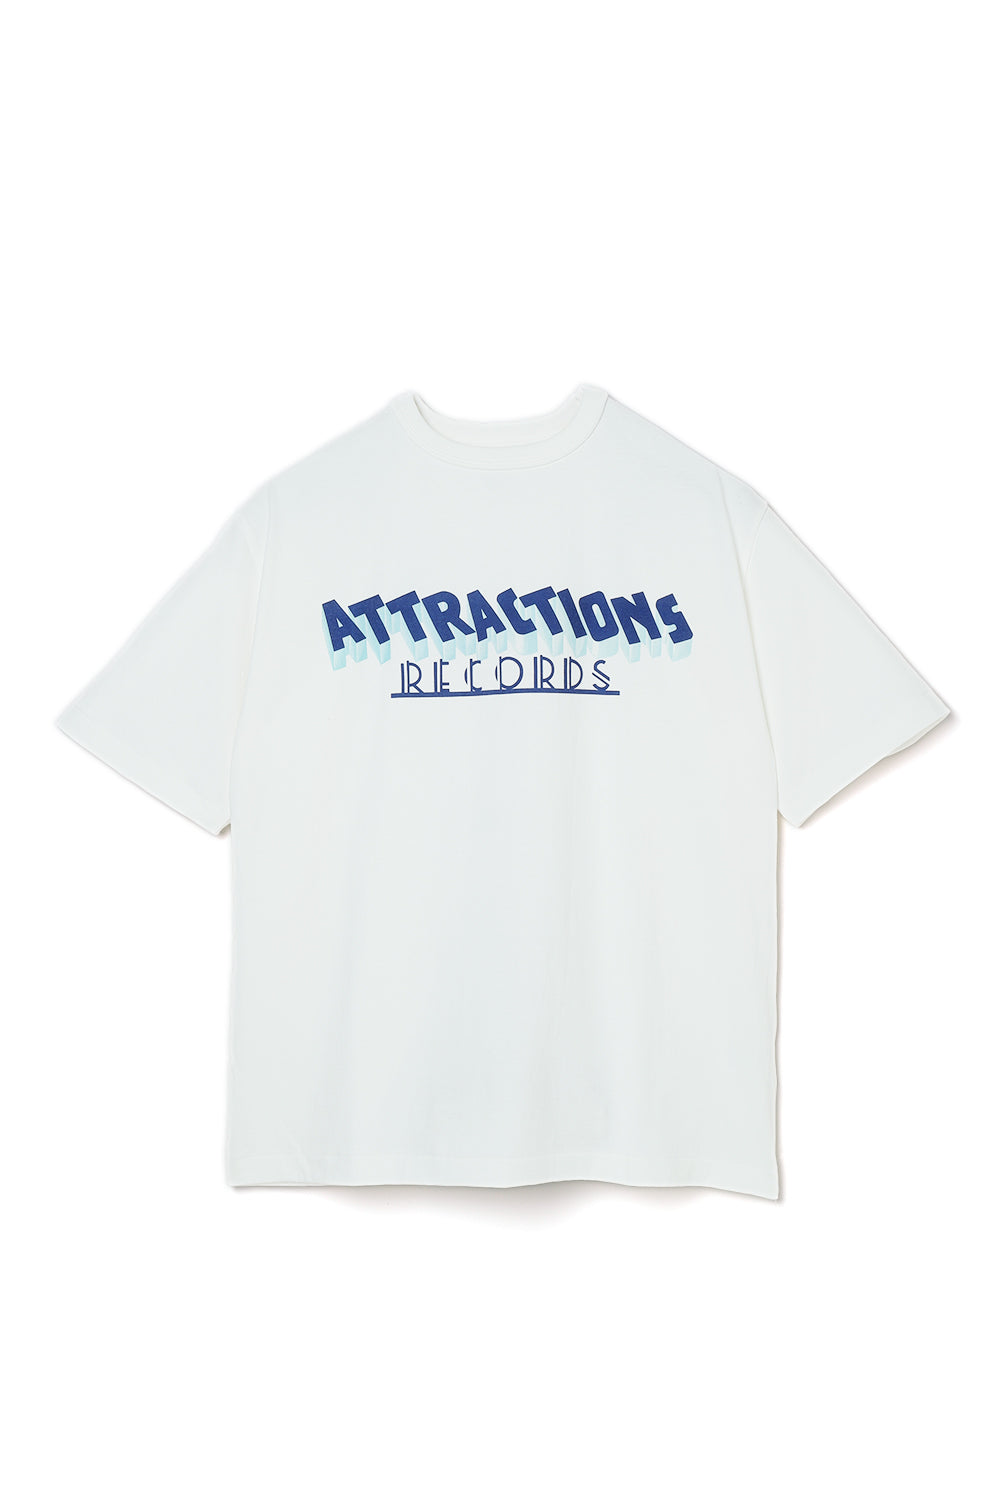 AM0005 Attractions Records -White-